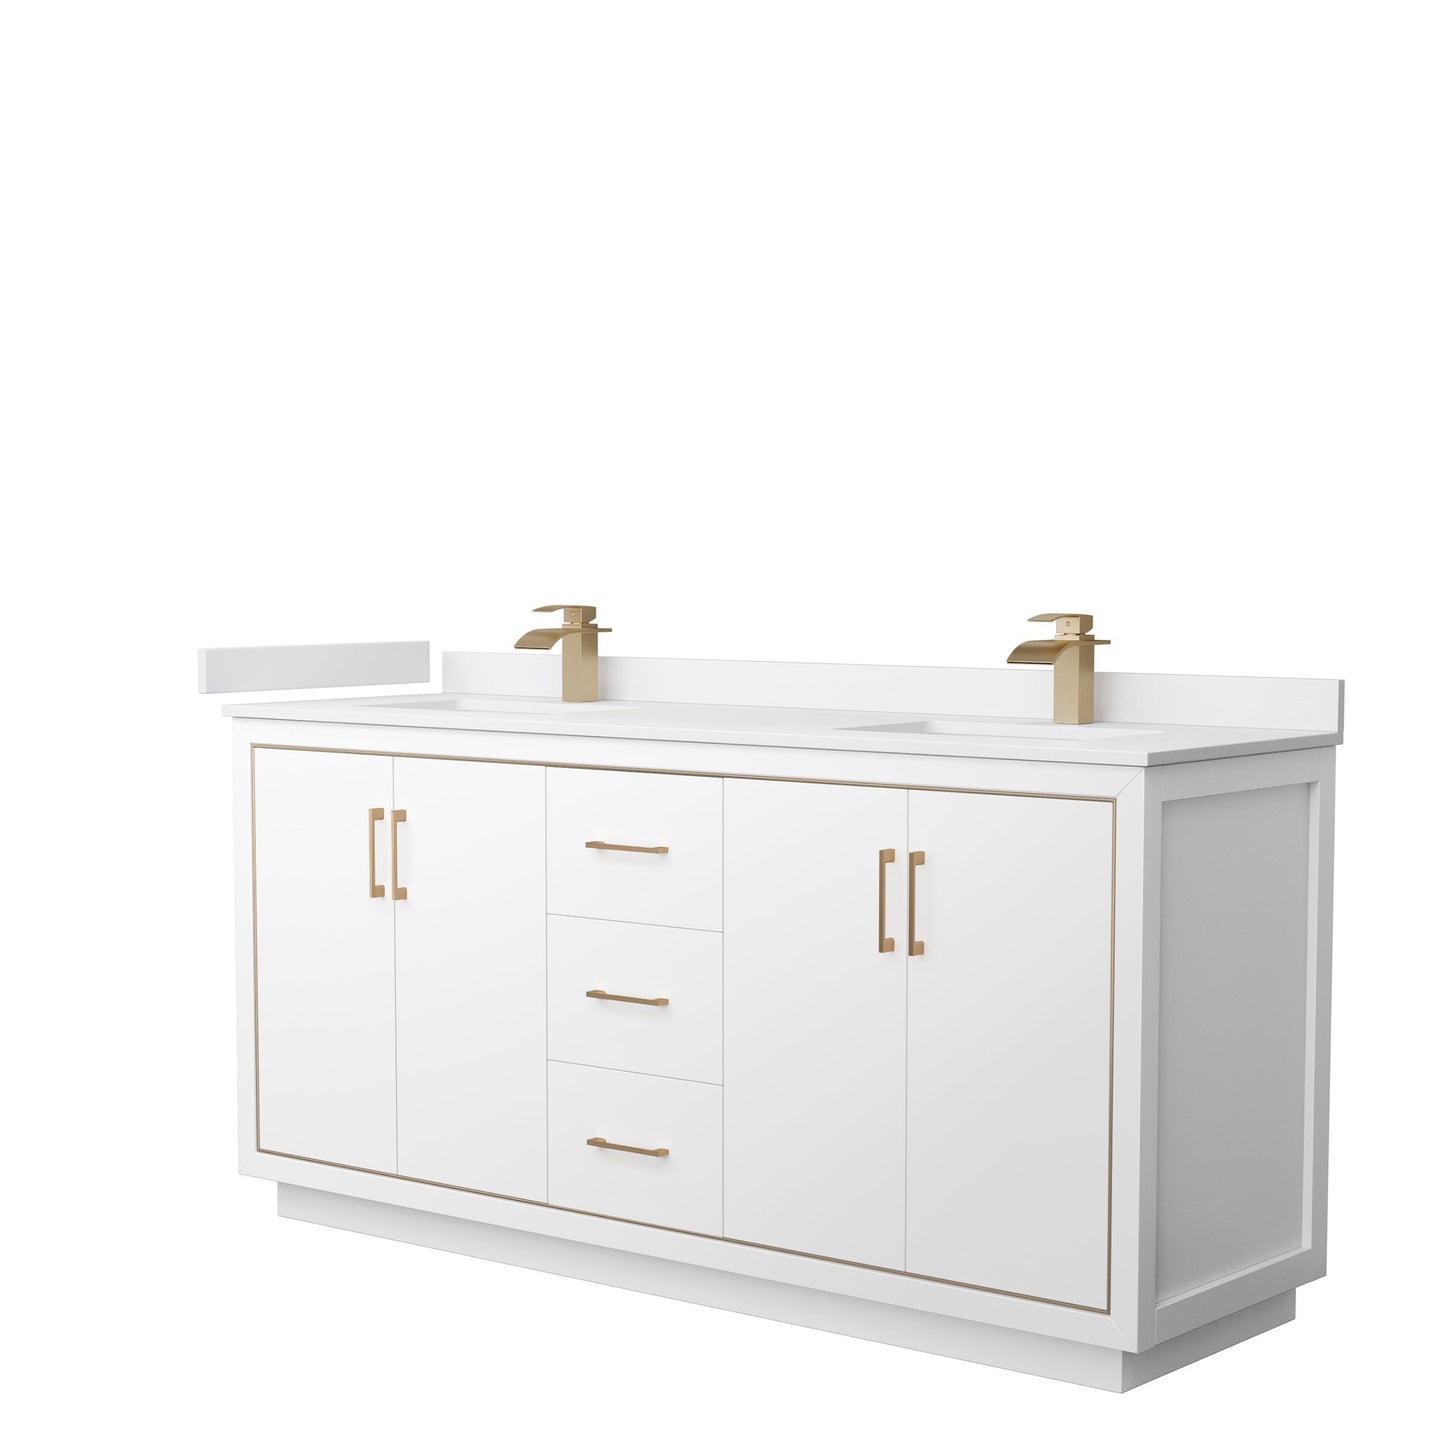 Wyndham Collection Icon 72" Double Bathroom Vanity in White, White Cultured Marble Countertop, Undermount Square Sinks, Satin Bronze Trim